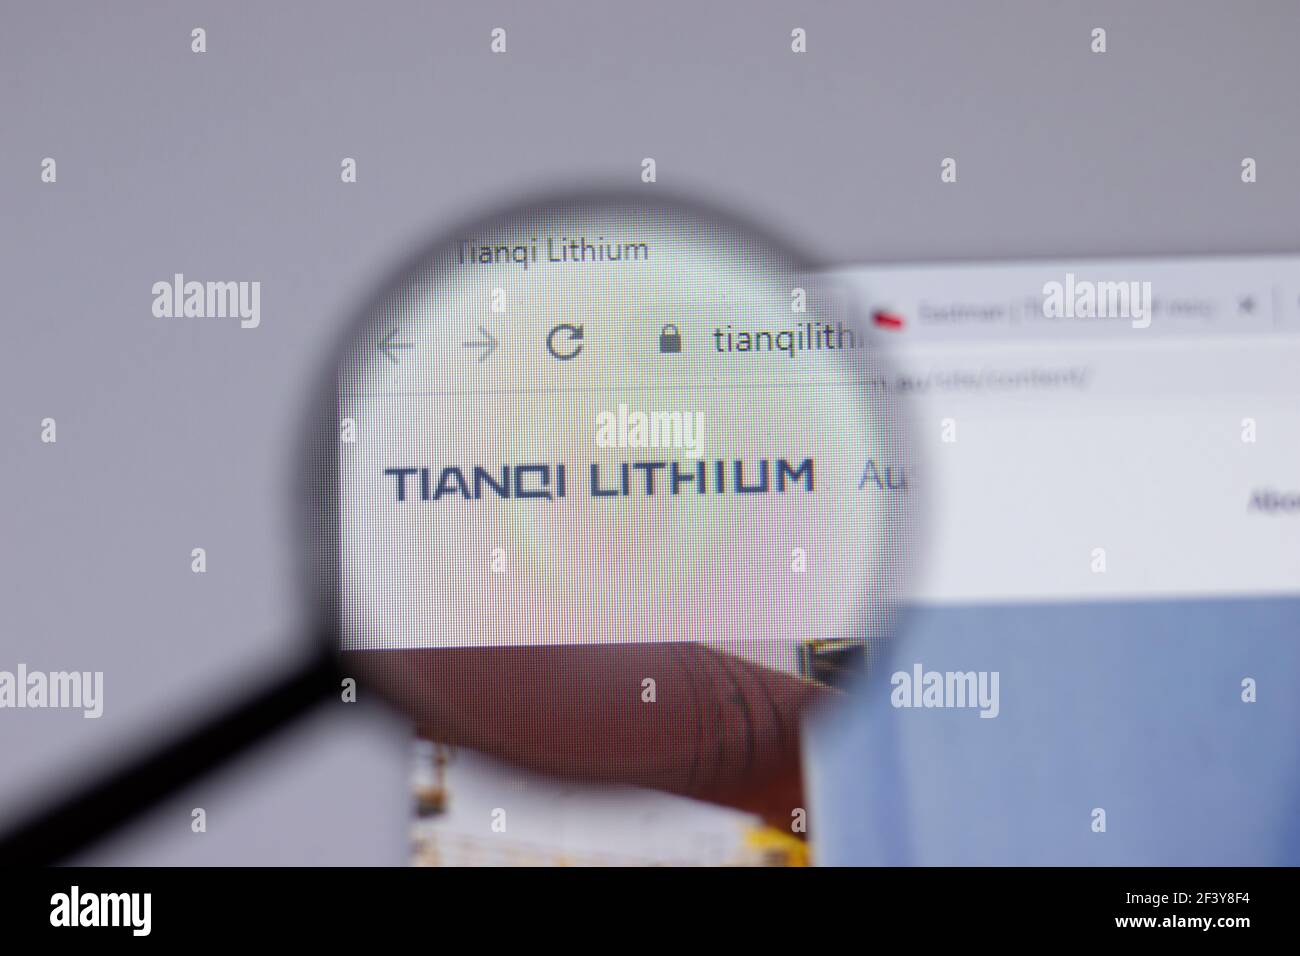 New York, USA - 18 March 2021: Tianqi Lithium company logo icon on website, Illustrative Editorial Stock Photo